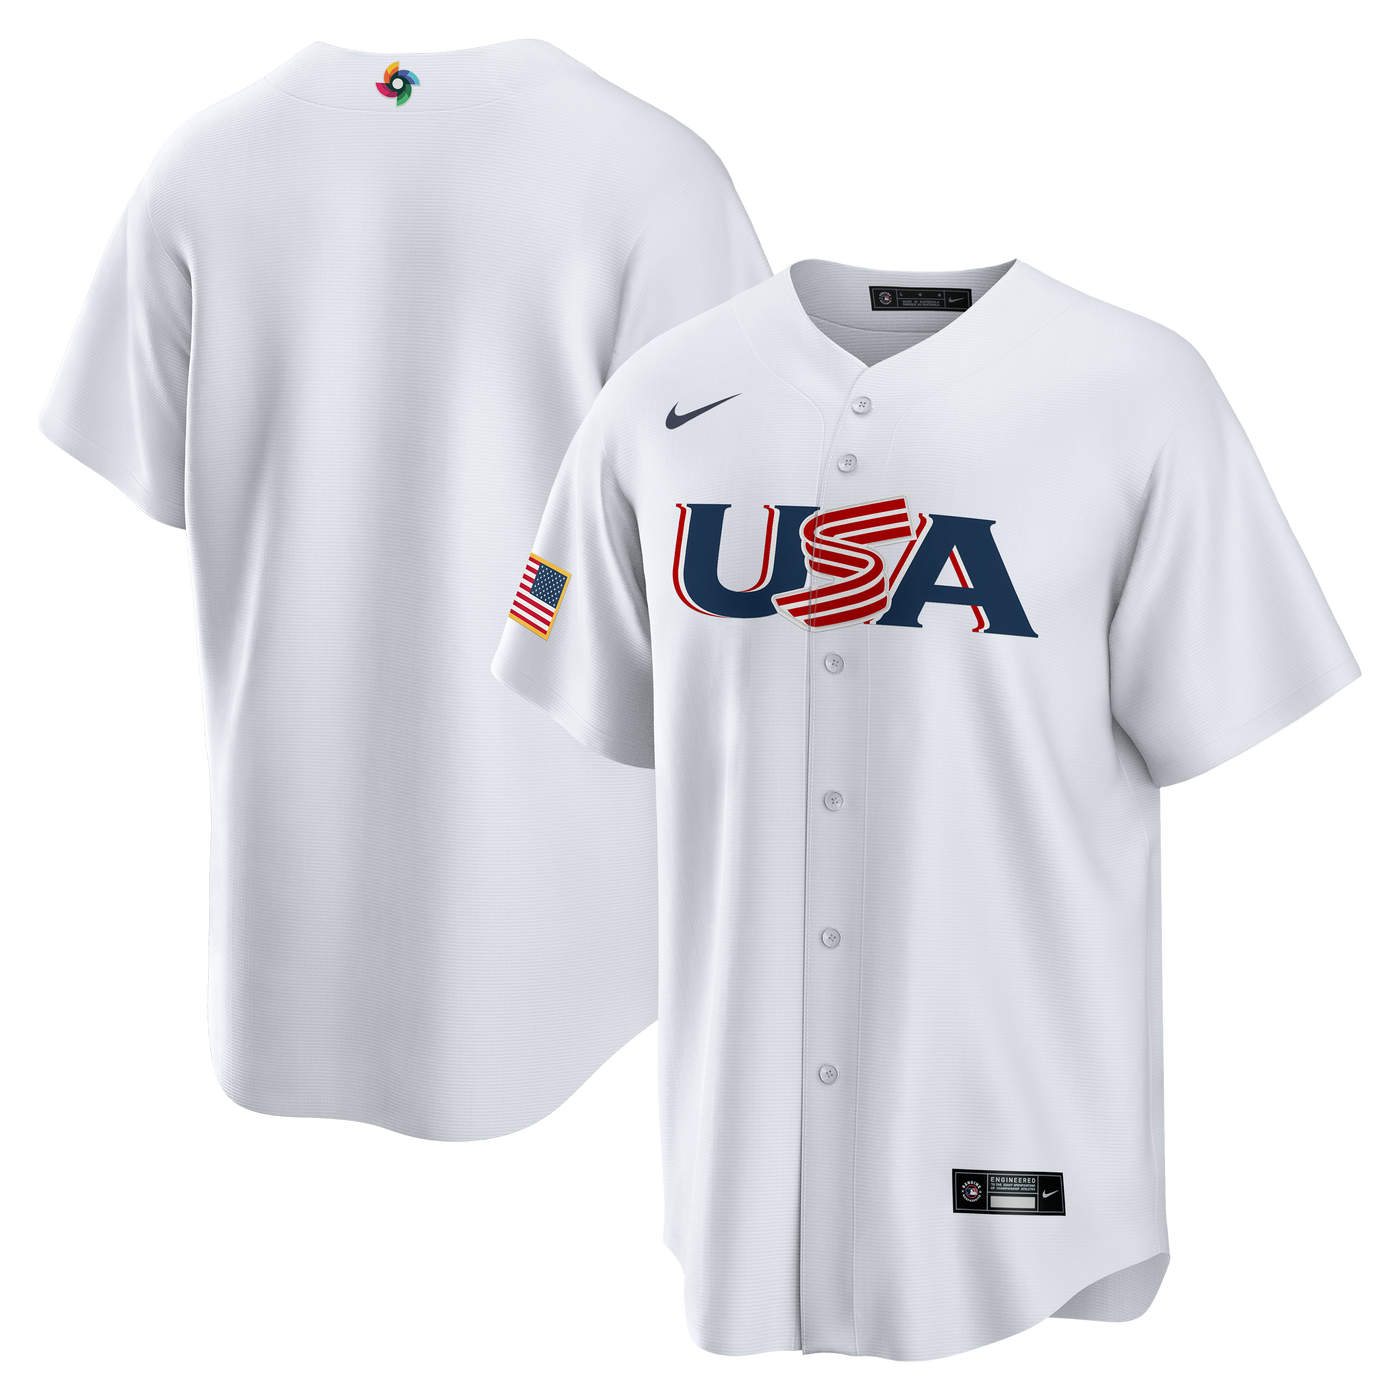 Men's Chicago White Sox Nike Authentic Road Jersey | Grandstand Ltd.